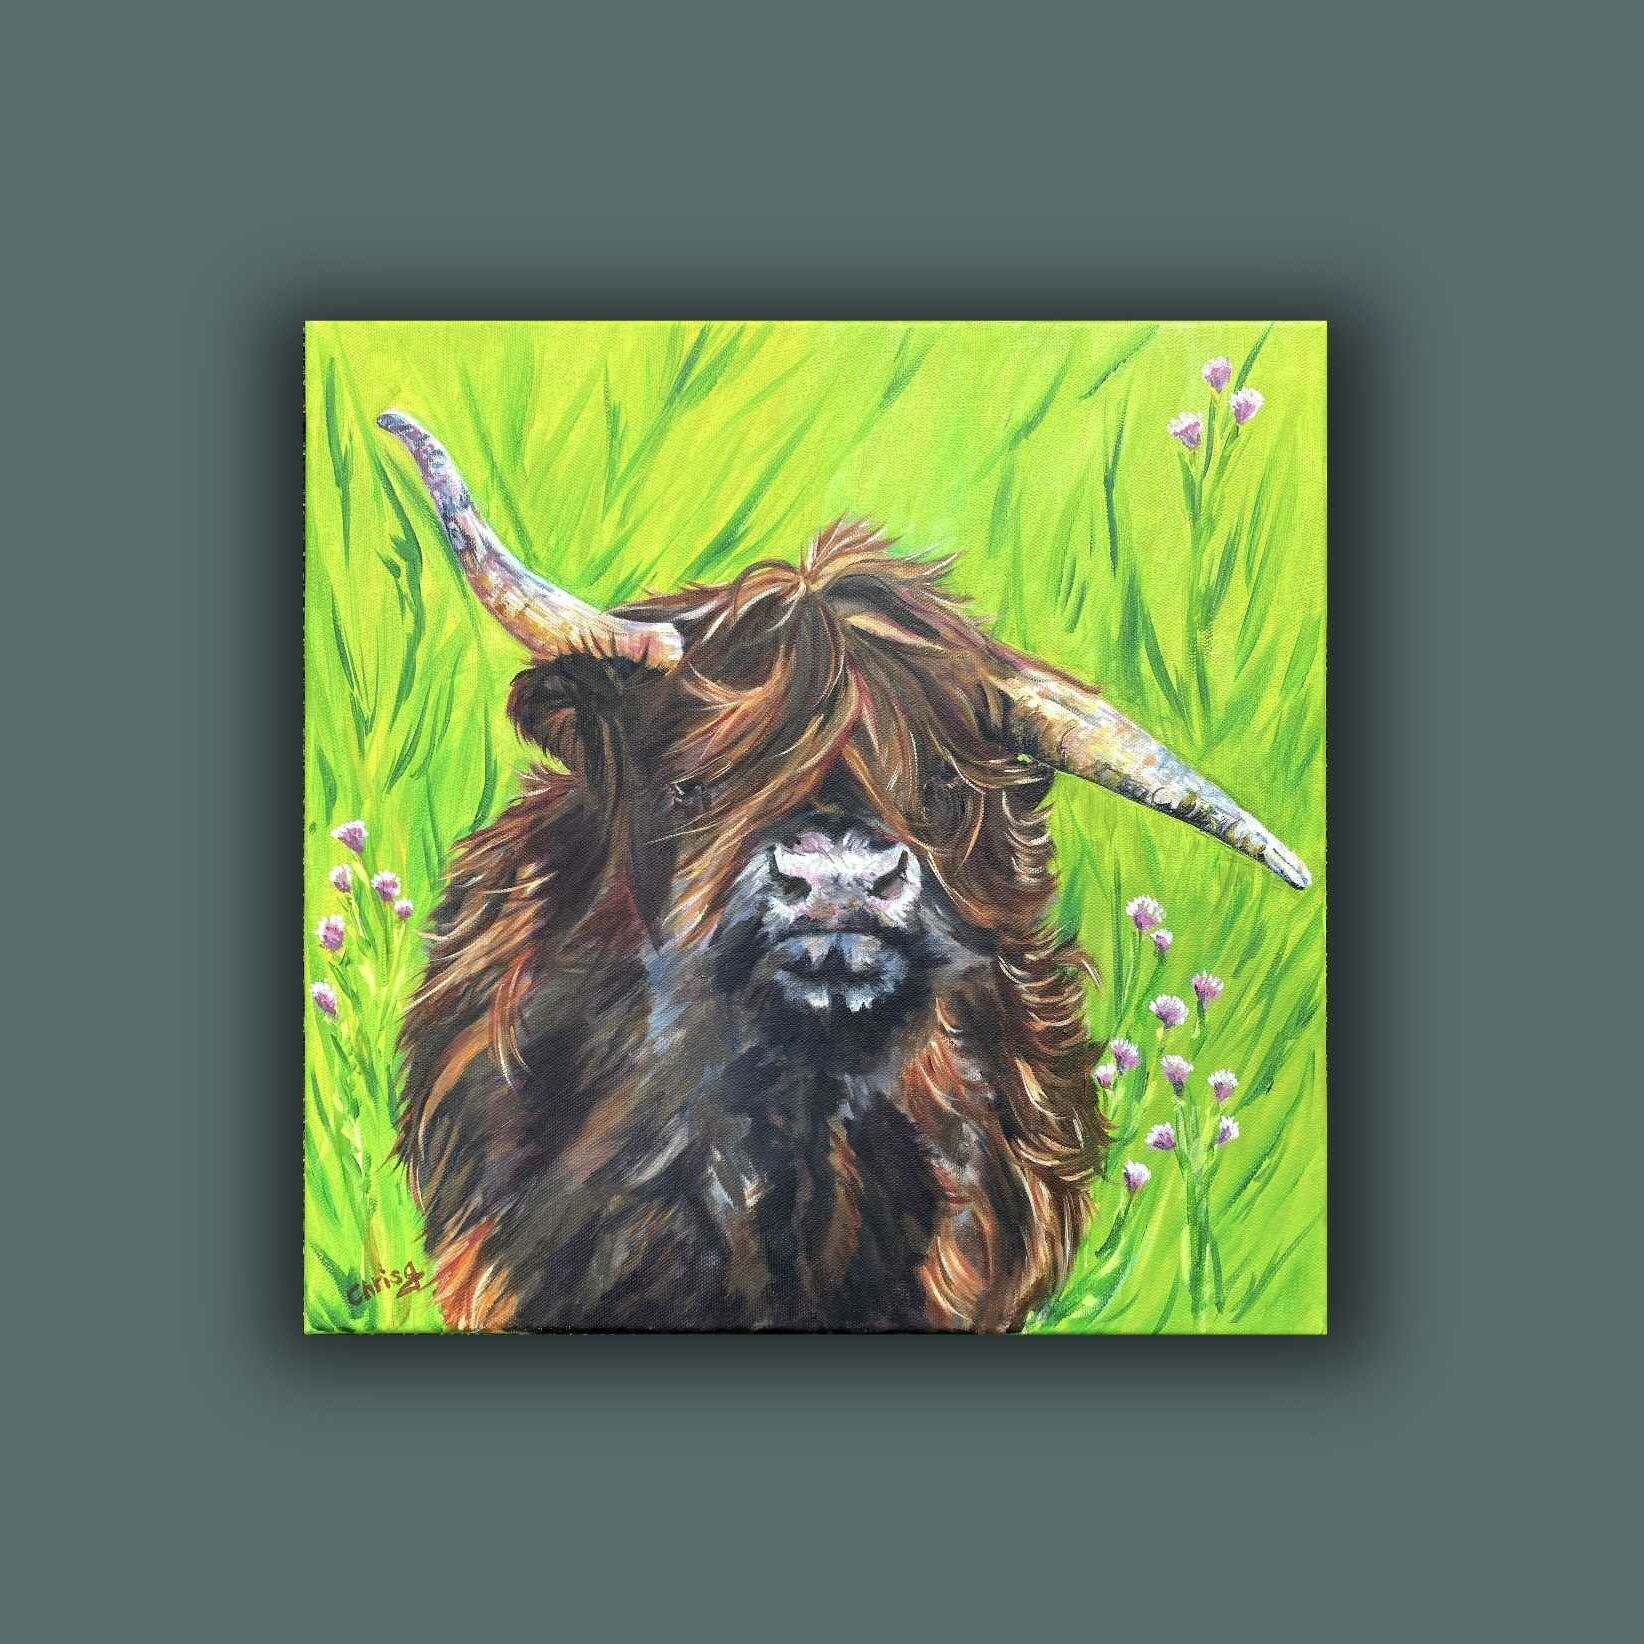 Canvas print of the highland called “wild child”